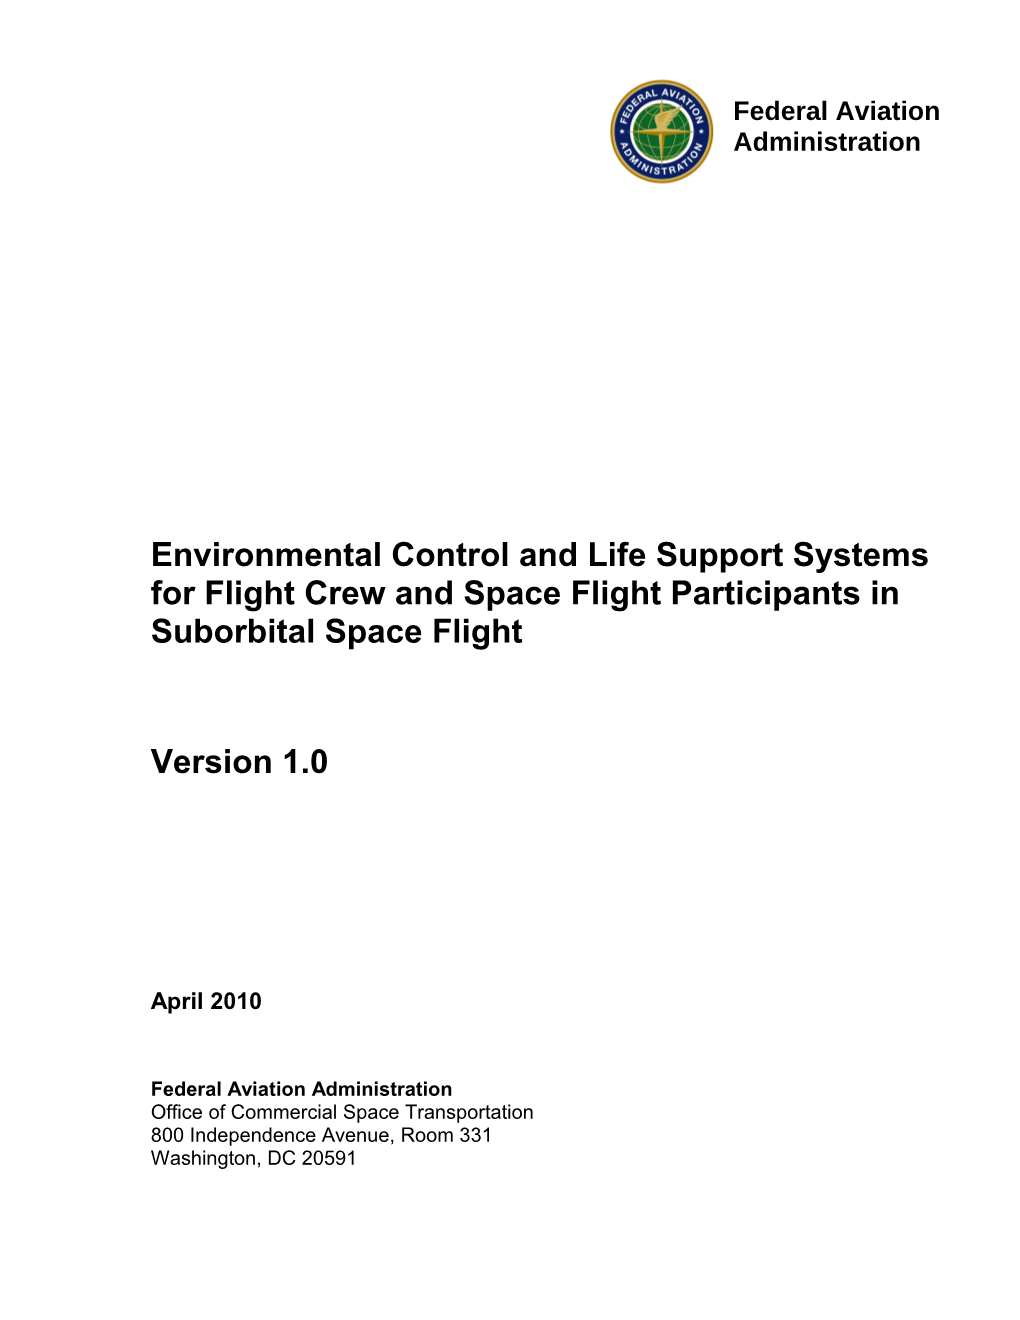 Environmental Control and Life Support Systems for Flight Crew and Space Flight Participants